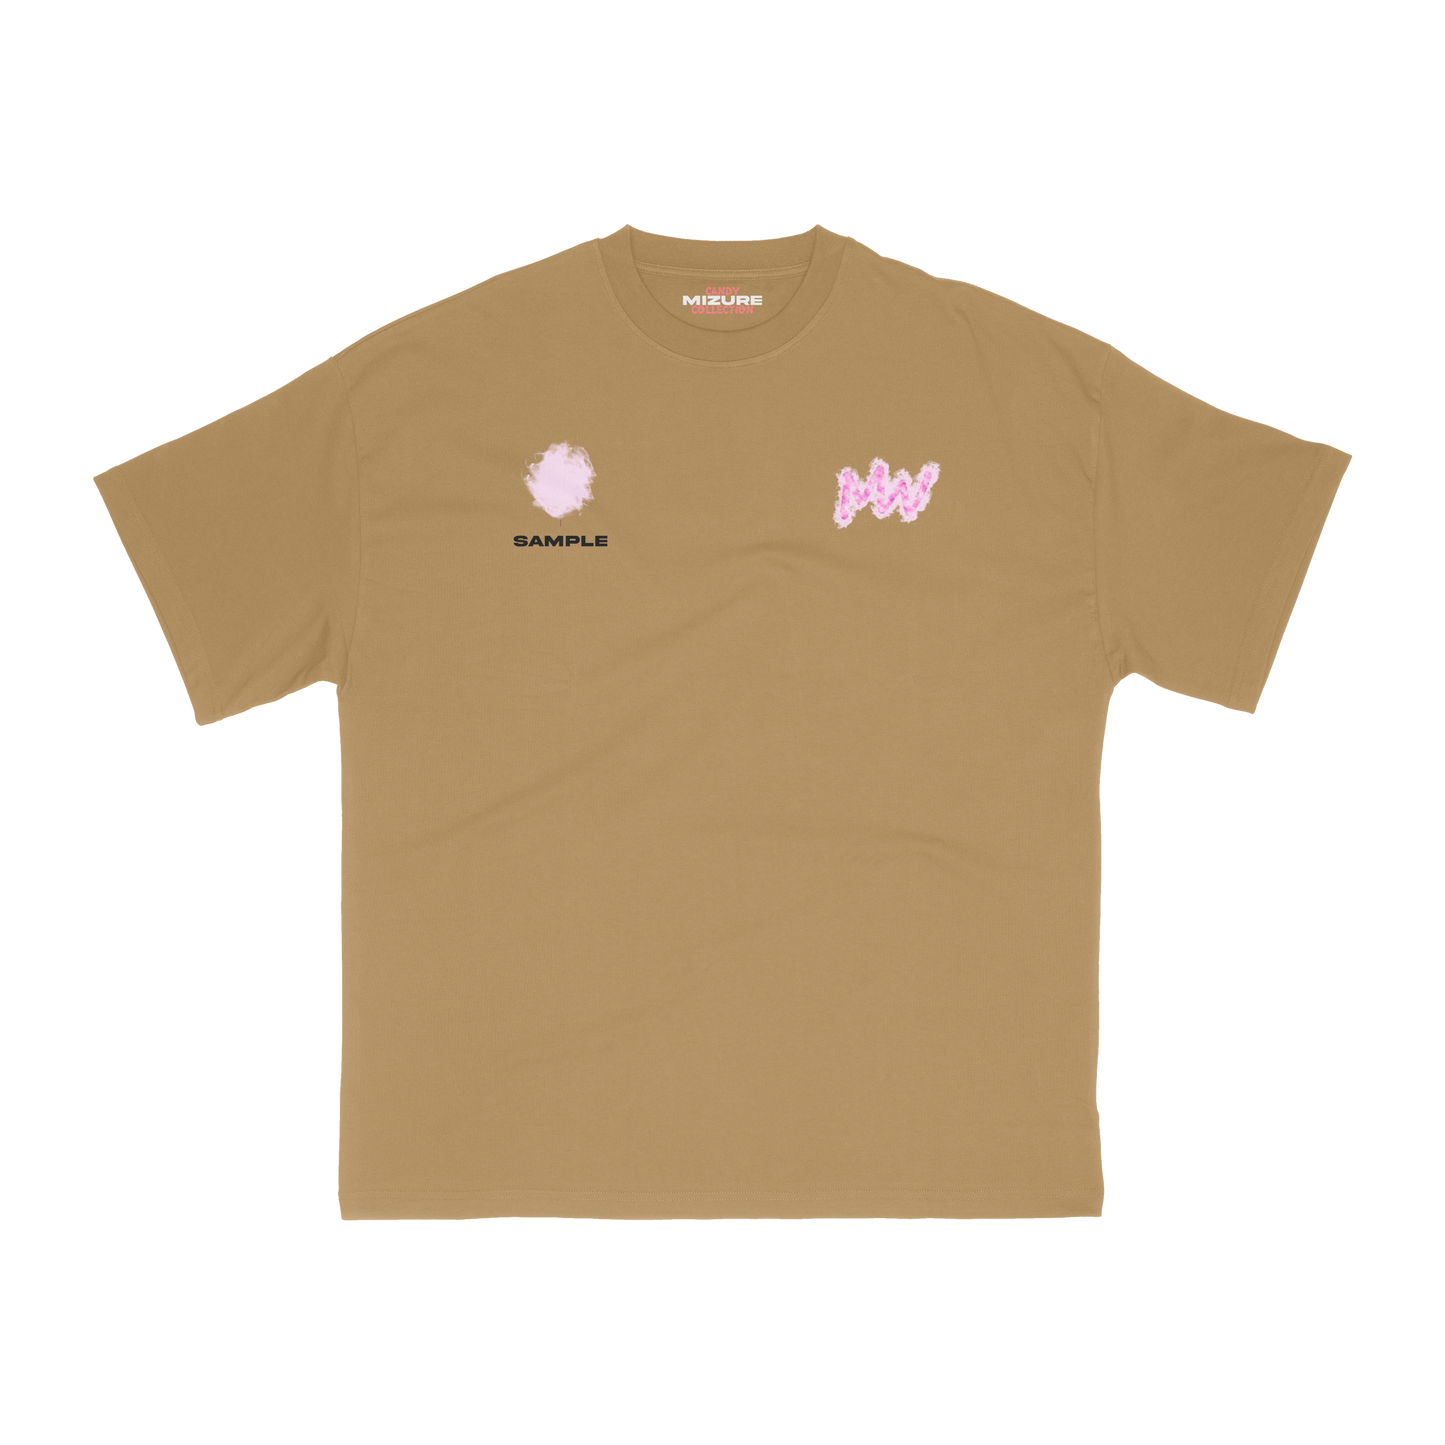 Cotton Candy Tee 15/15